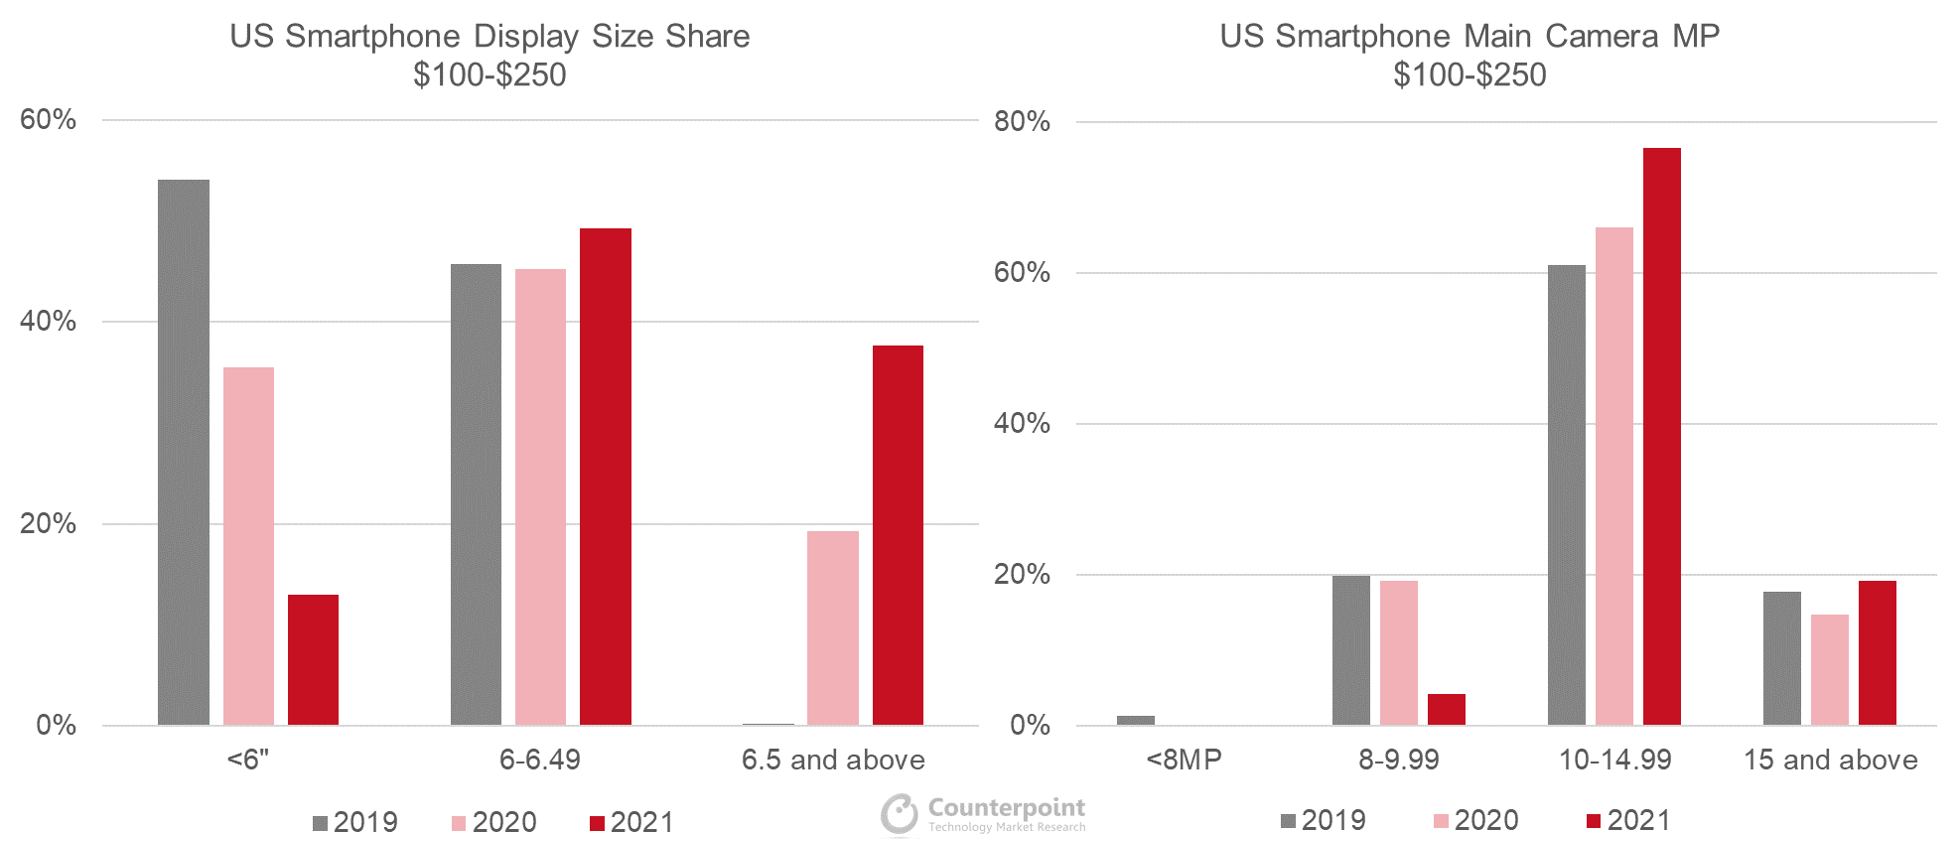 Counterpoint Research US Smartphone Display Size Share and Main Camera MP